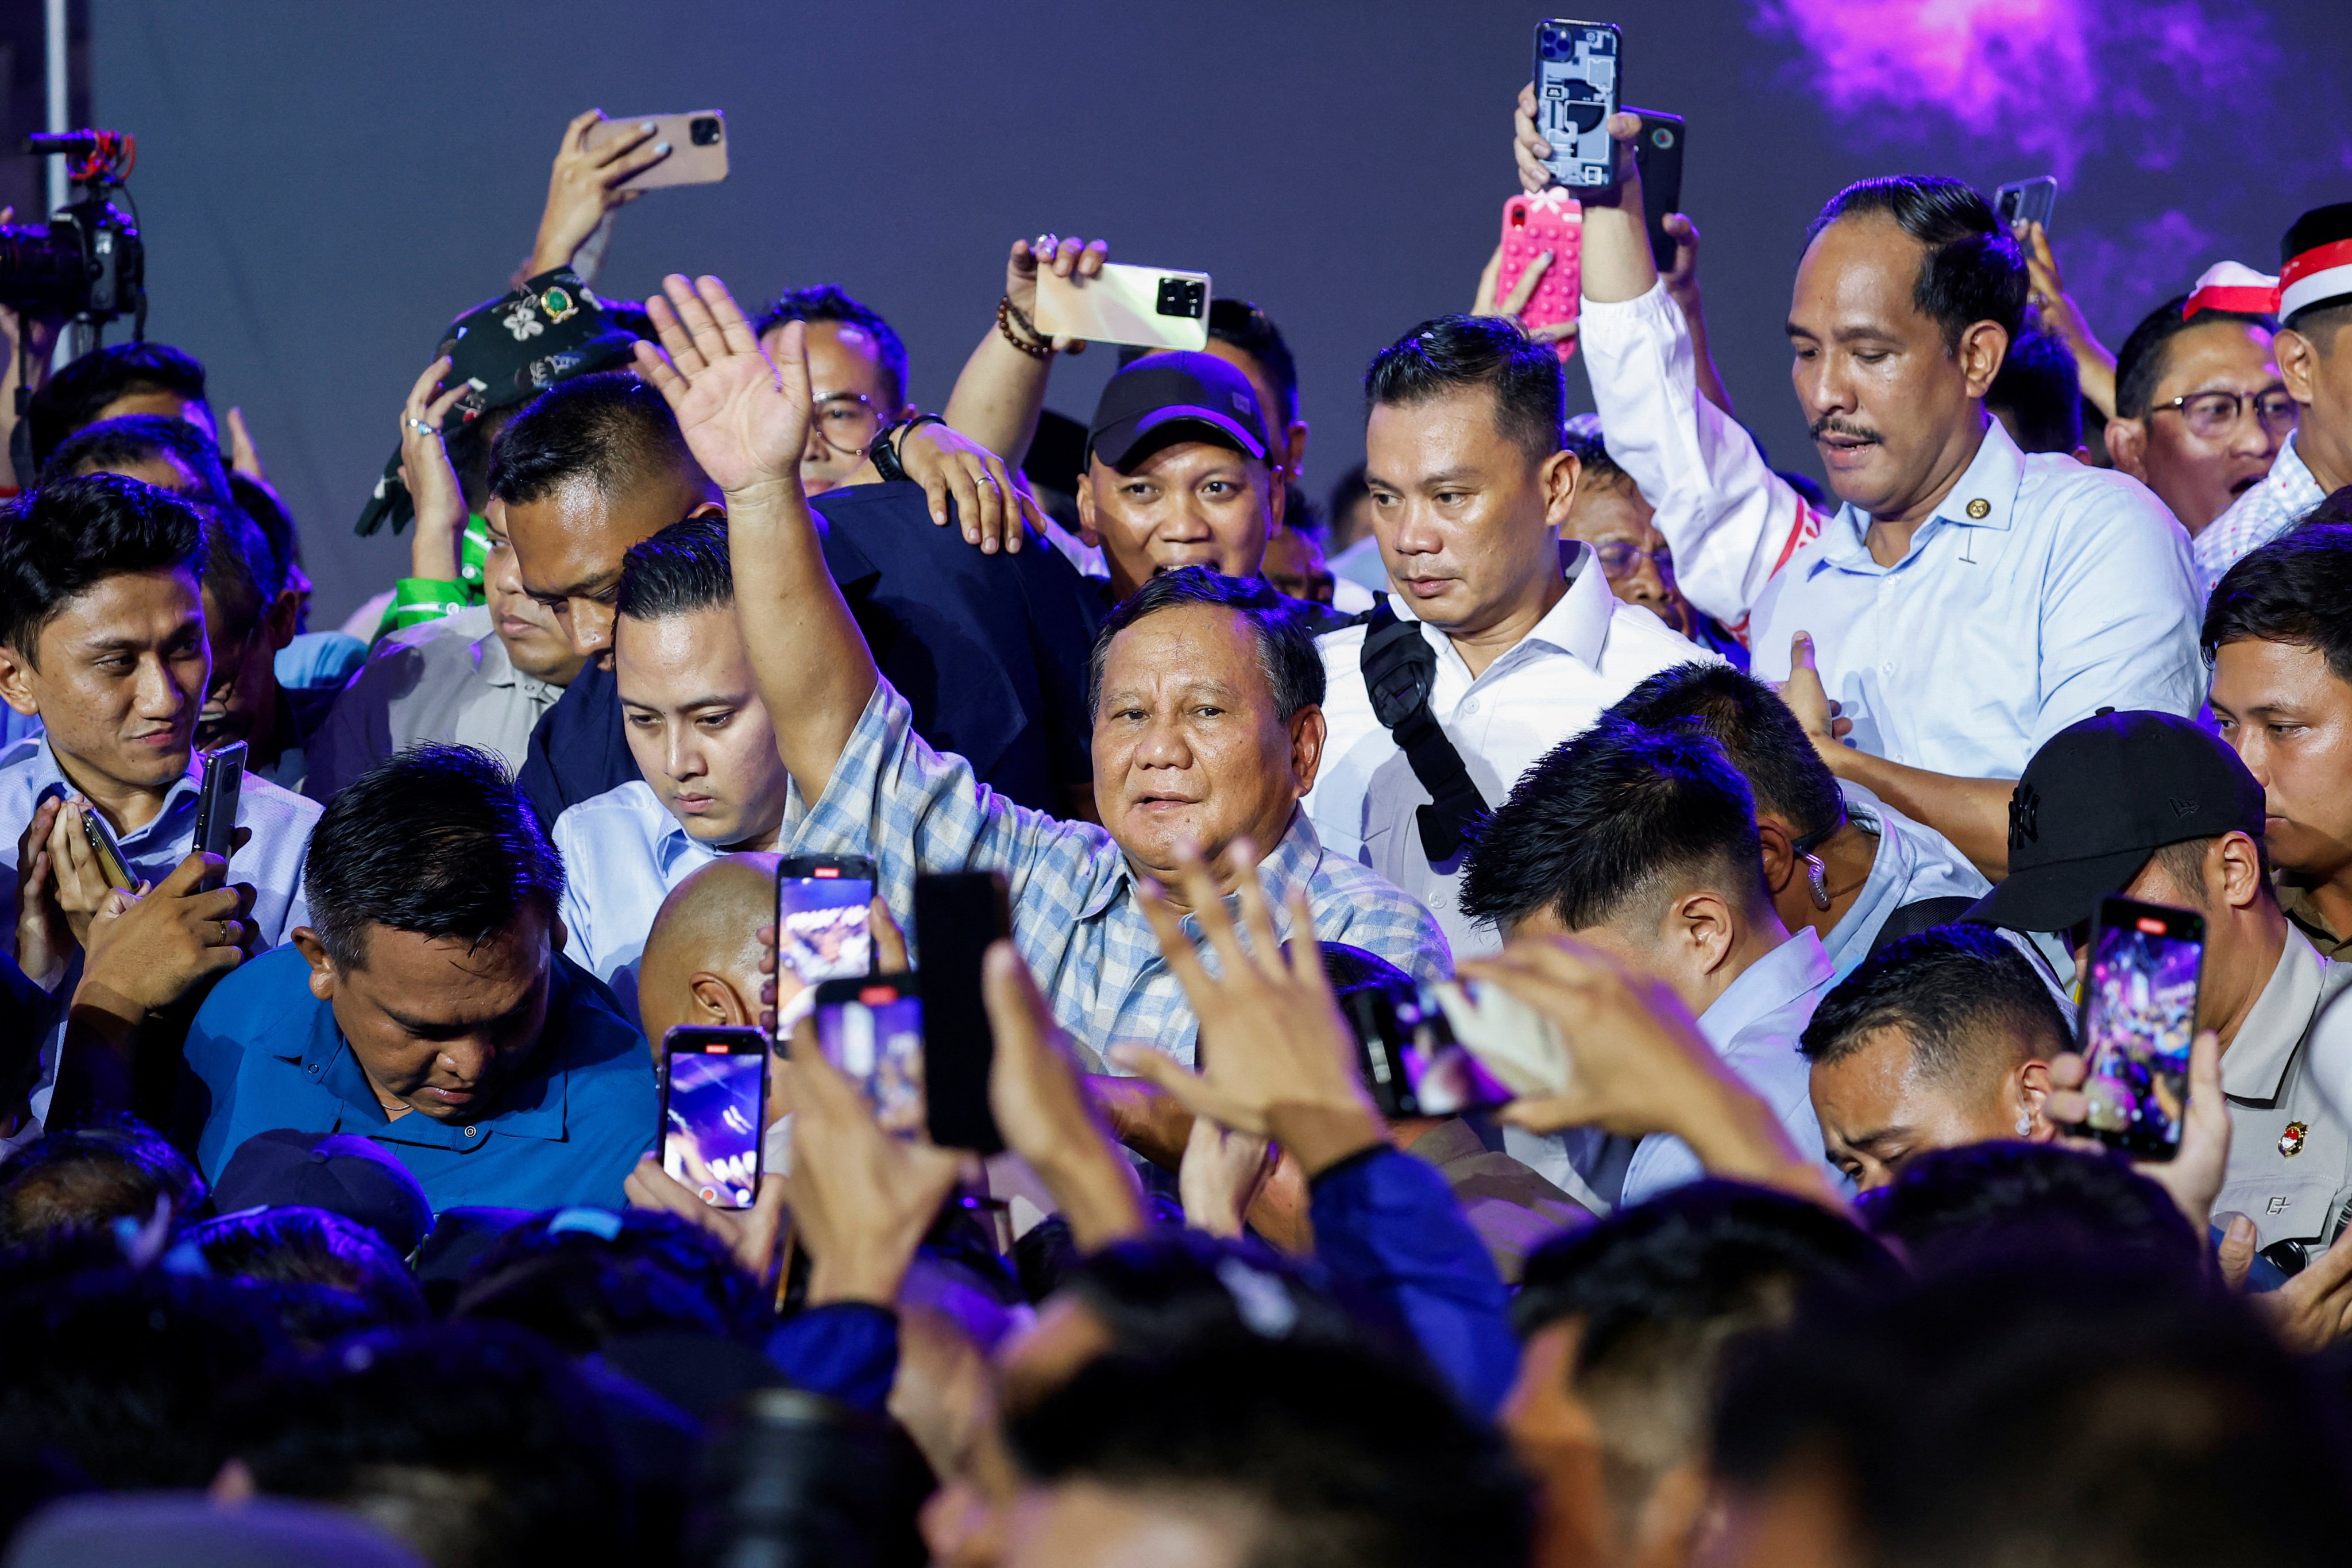 In this issue of the Global Impact newsletter, we look back at the result of the recent Indonesian election, with Prabowo Subianto set to be the country’s next president, based on quick-count results. Photo: Reuters